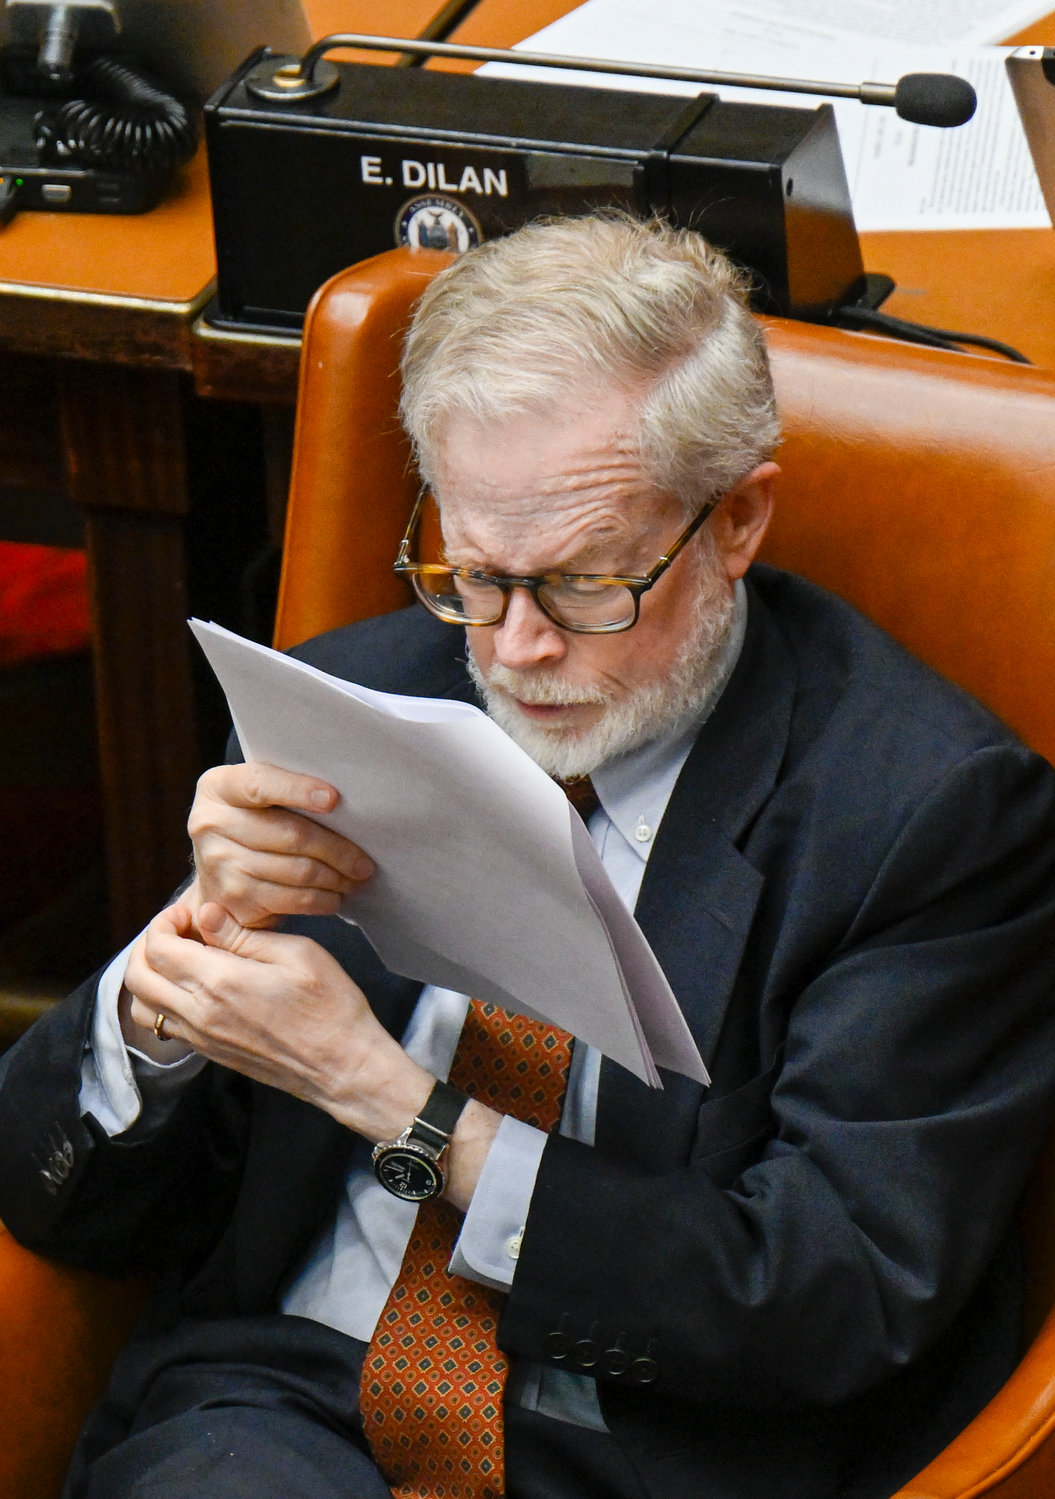 Assemblyman Richard Gottfried, D-Manhattan, who is retiring after 52 years in the Assembly, works on legislative bills ending his run as the longest-serving lawmaker in state history at the state Capitol on the last scheduled day of the 2022 legislative session, Thursday, June 2, 2022, in Albany, N.Y. (AP Photo/Hans Pennink)